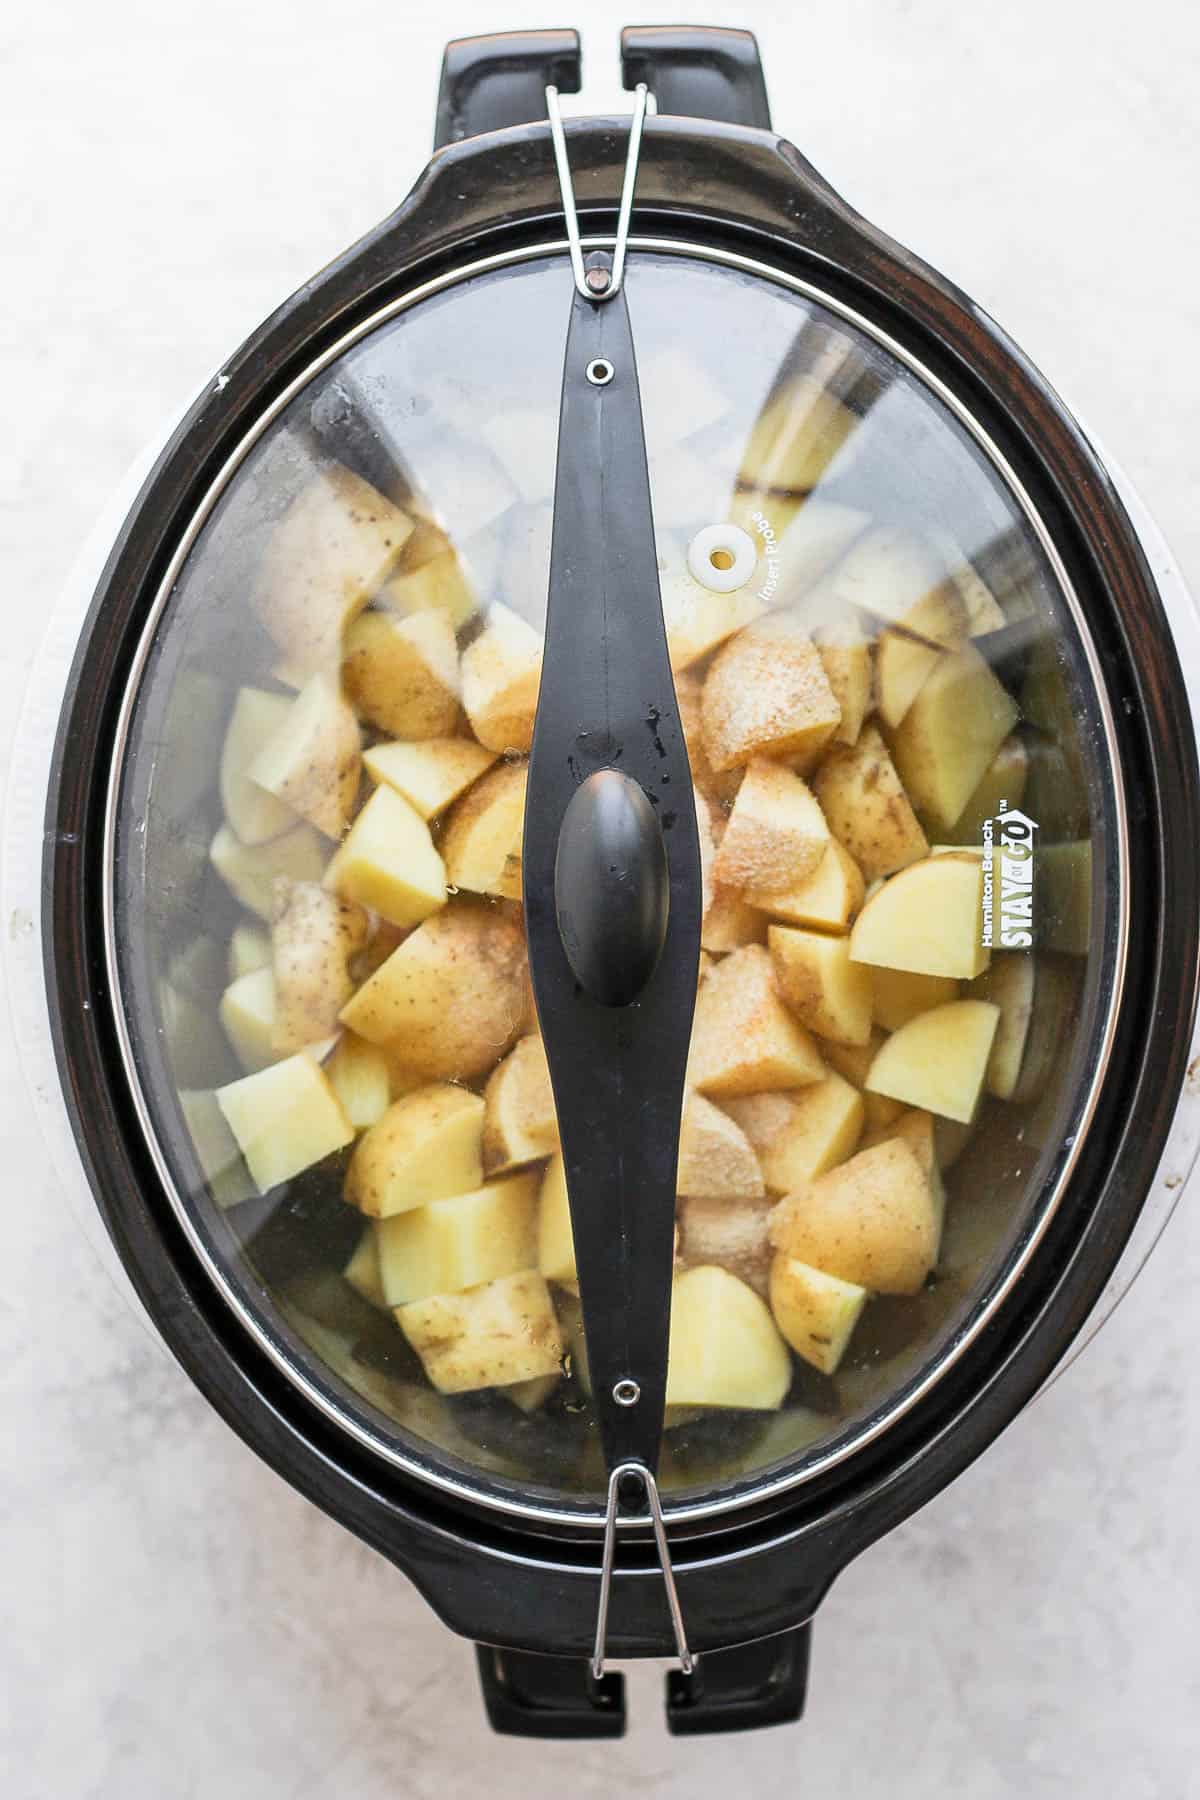 A slow cooker lid placed over the slow cooker containing the potatoes, broth, and seasonings. 